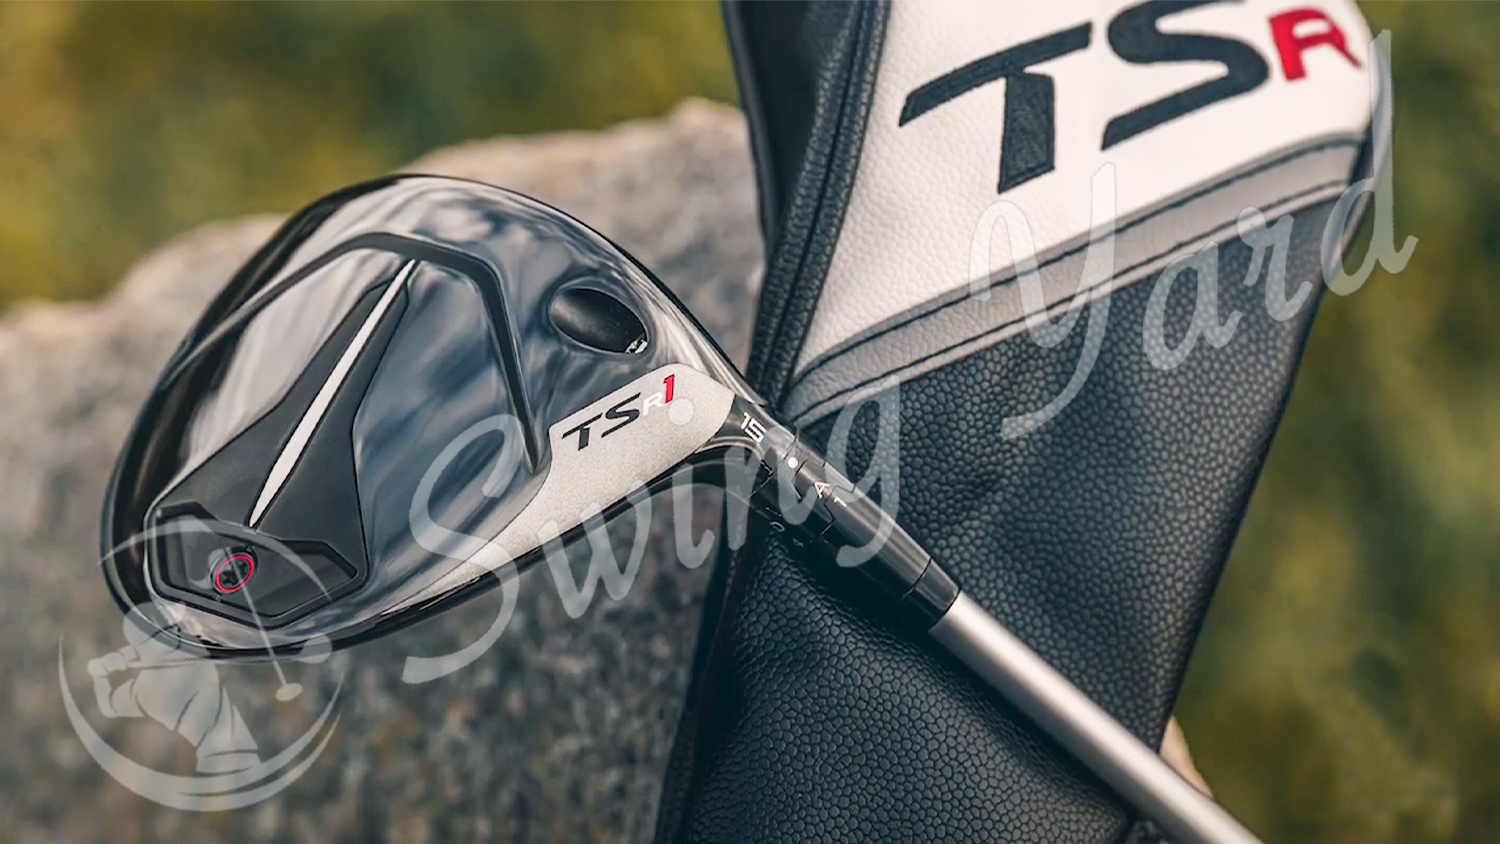 The Titleist TSR1 driver and its cover